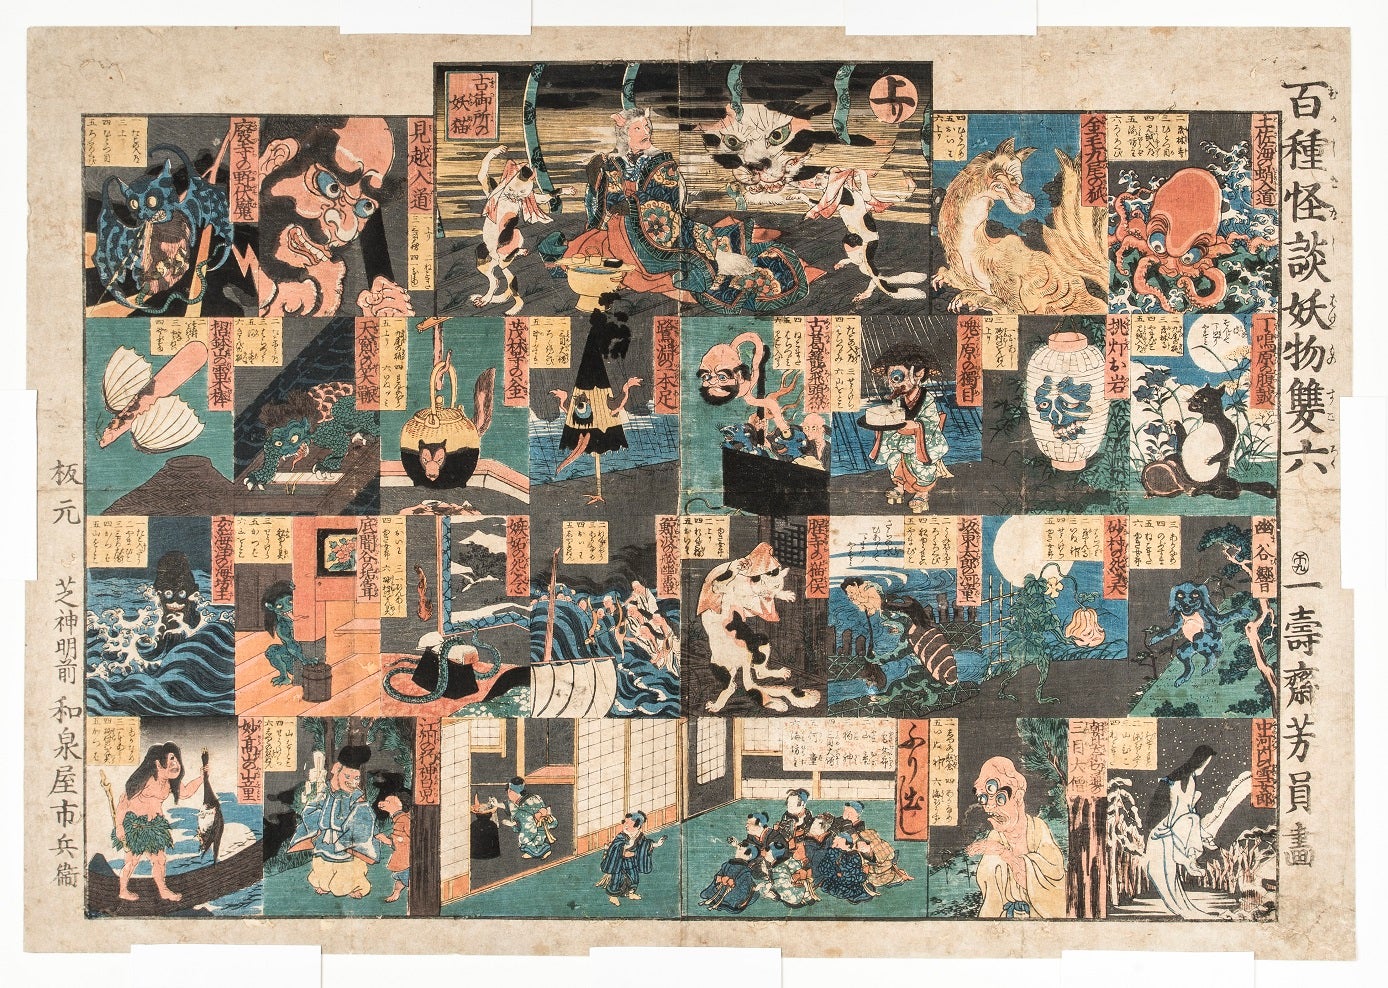 Antique Japanese game board depicts many types of yokai monsters